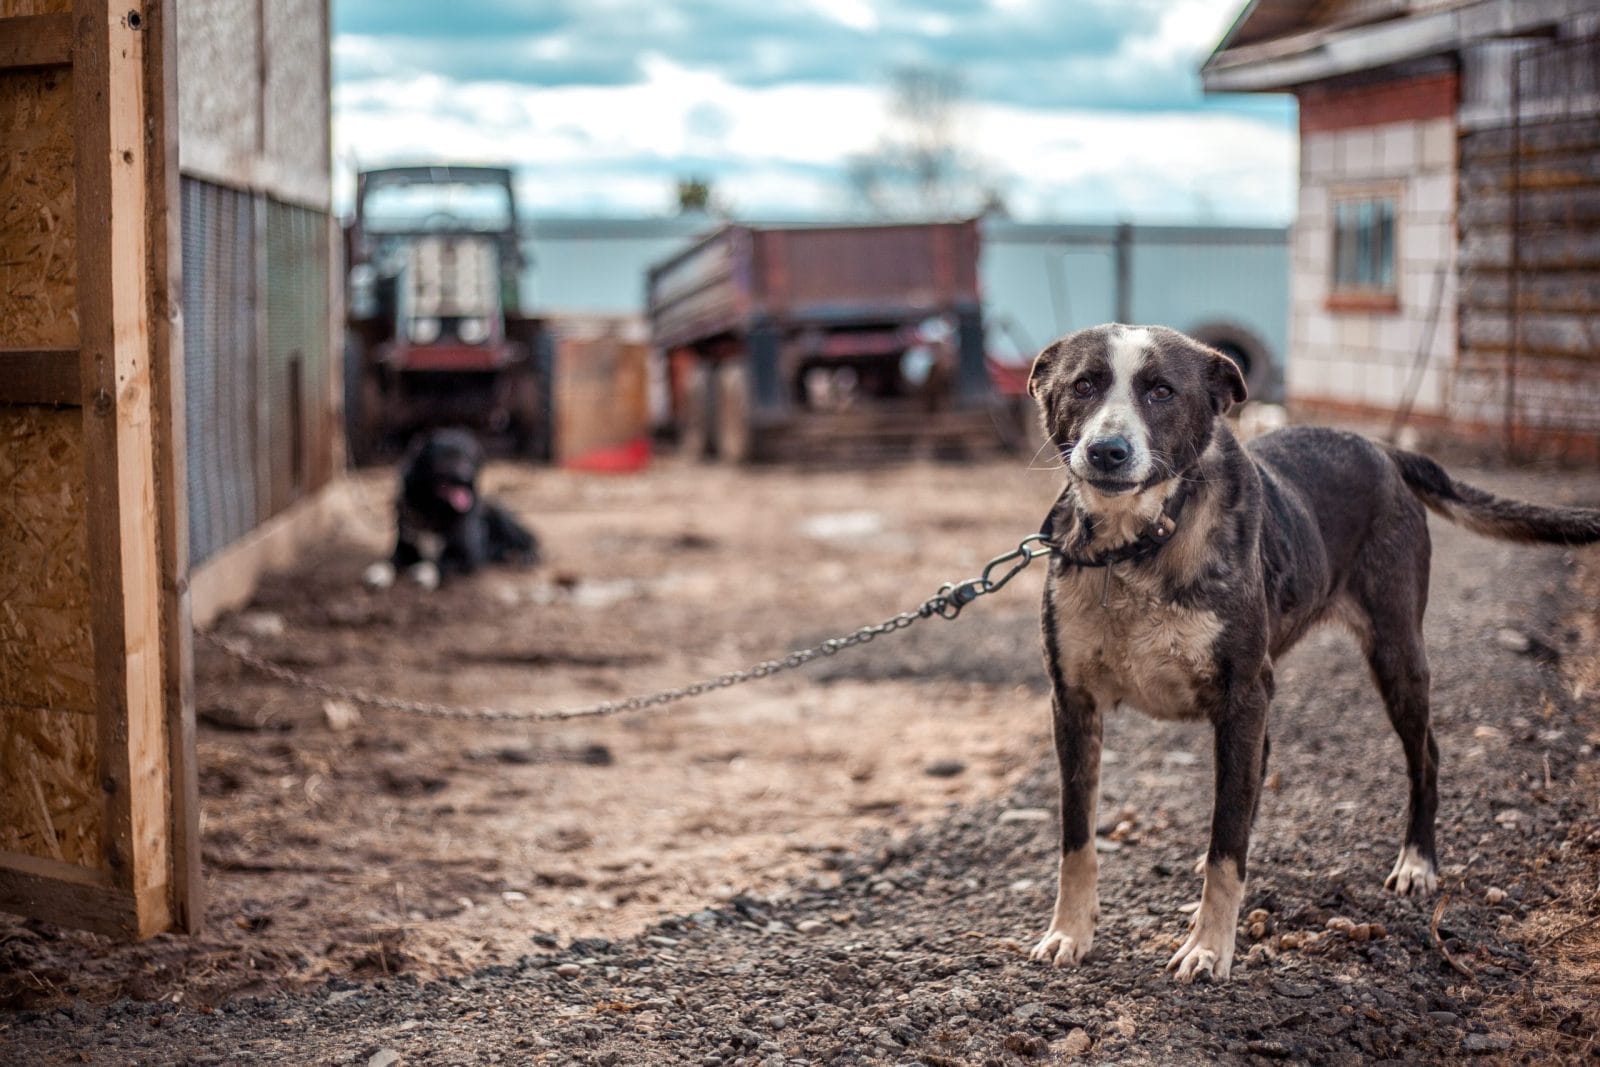 Is It Illegal to Leave Your Dog Chained Outside in Kansas? Here’s What the Law Says